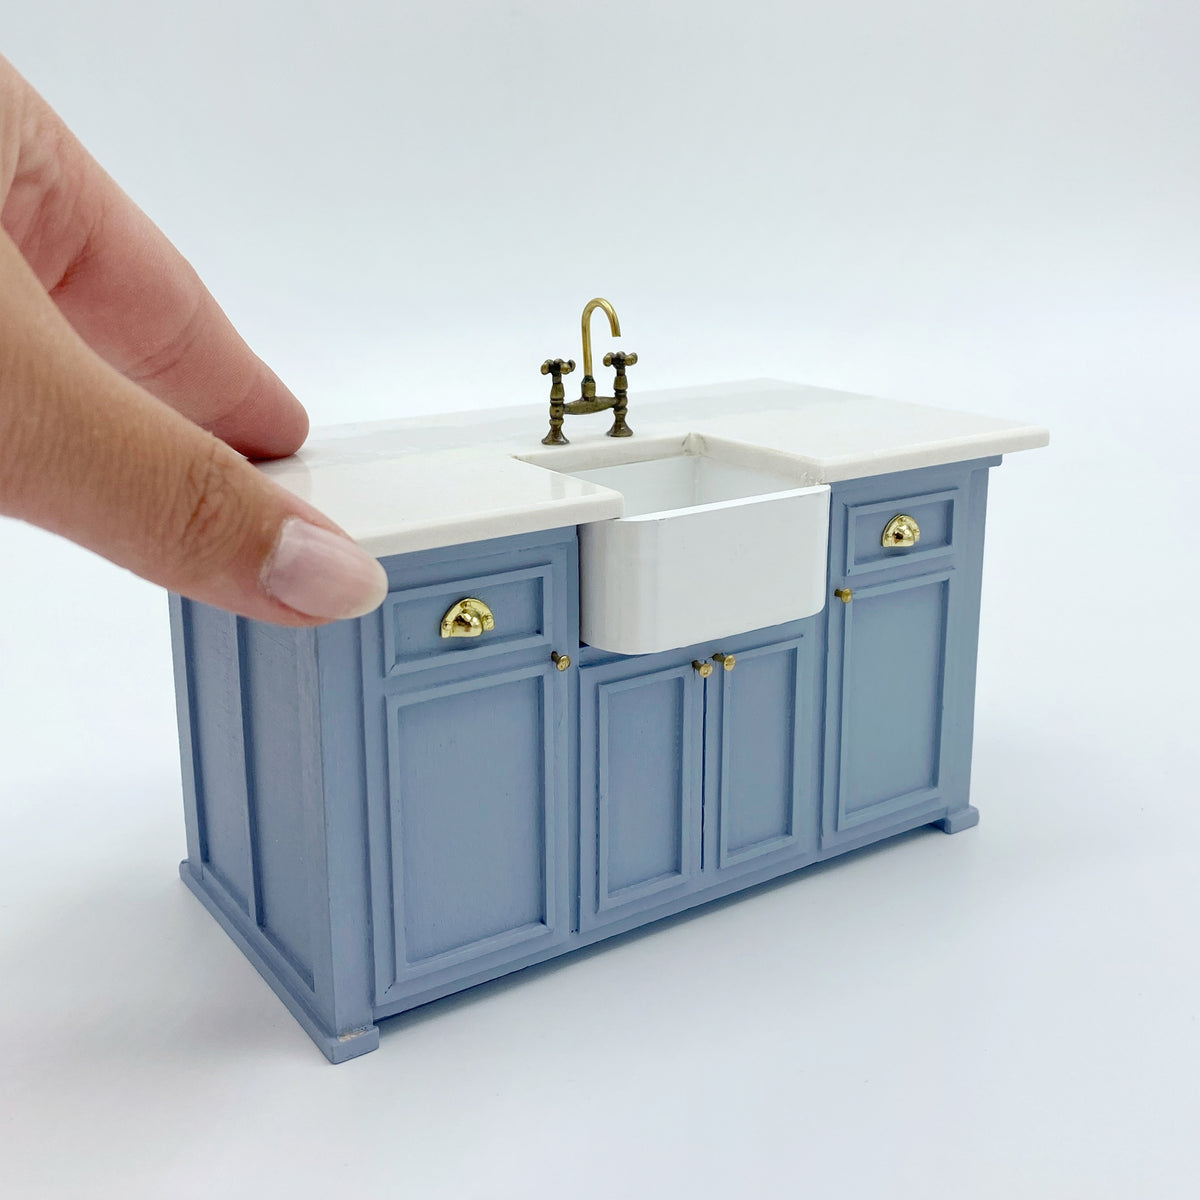 Custom Dollhouse Kitchen Island With Sink - 1:12 scale by Life In A Do ...